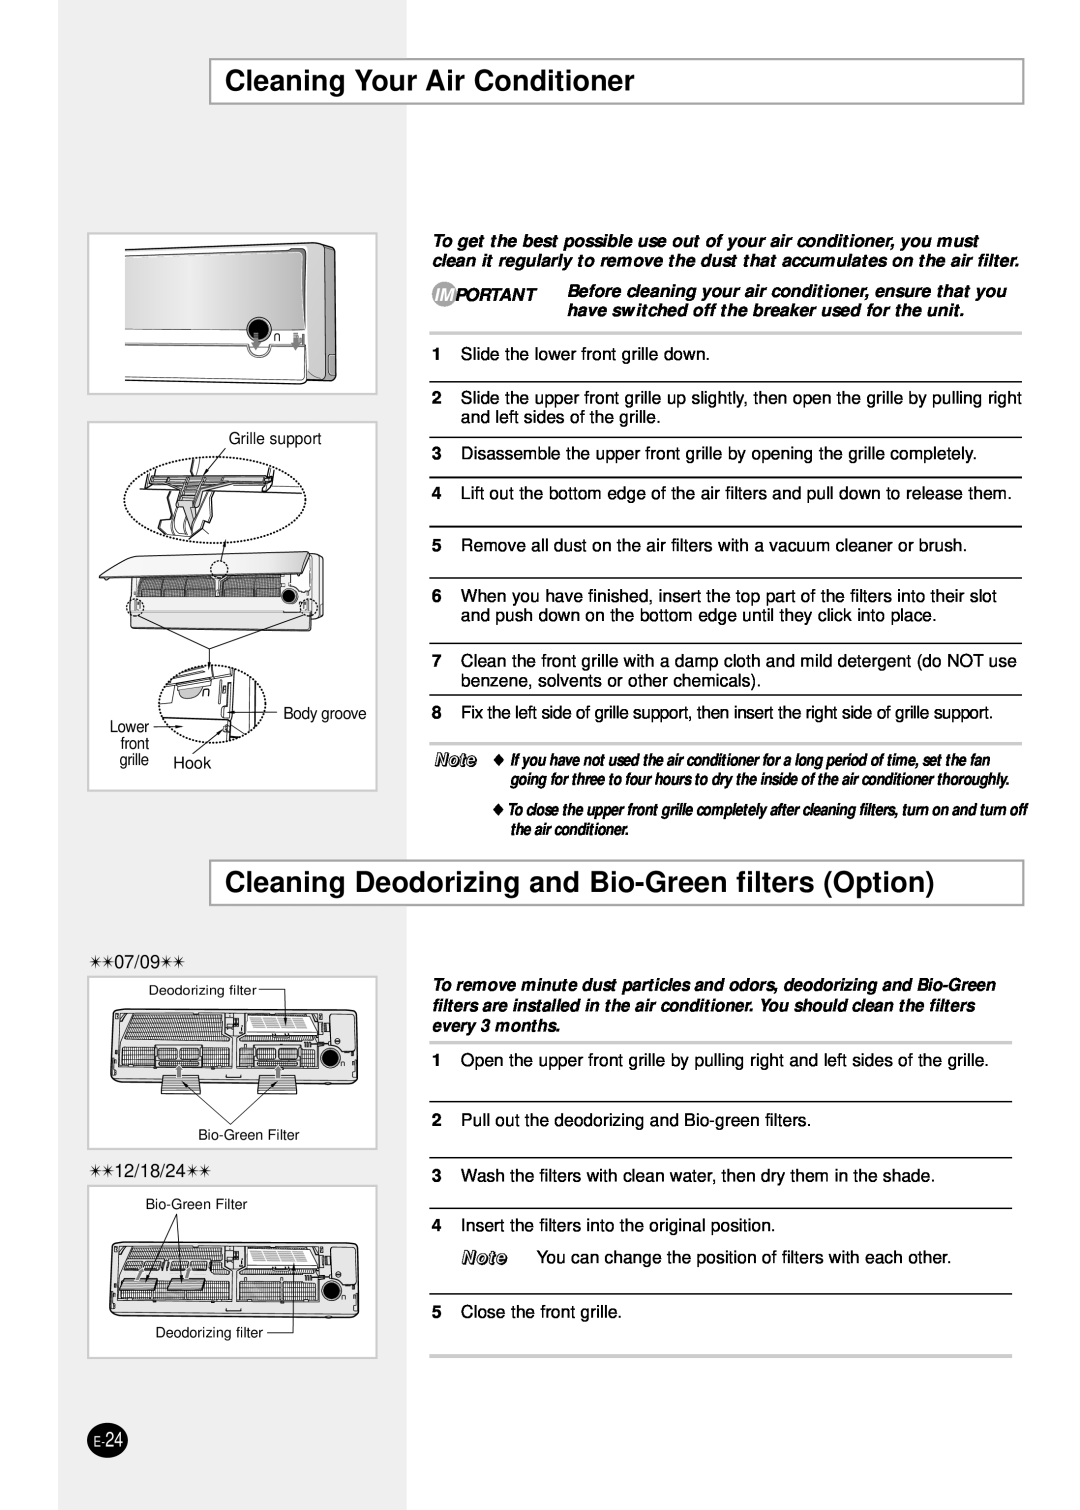 Samsung SH24TP6 manual Cleaning Your Air Conditioner, Cleaning Deodorizing and Bio-Green filters Option, 07/09, 12/18/24 